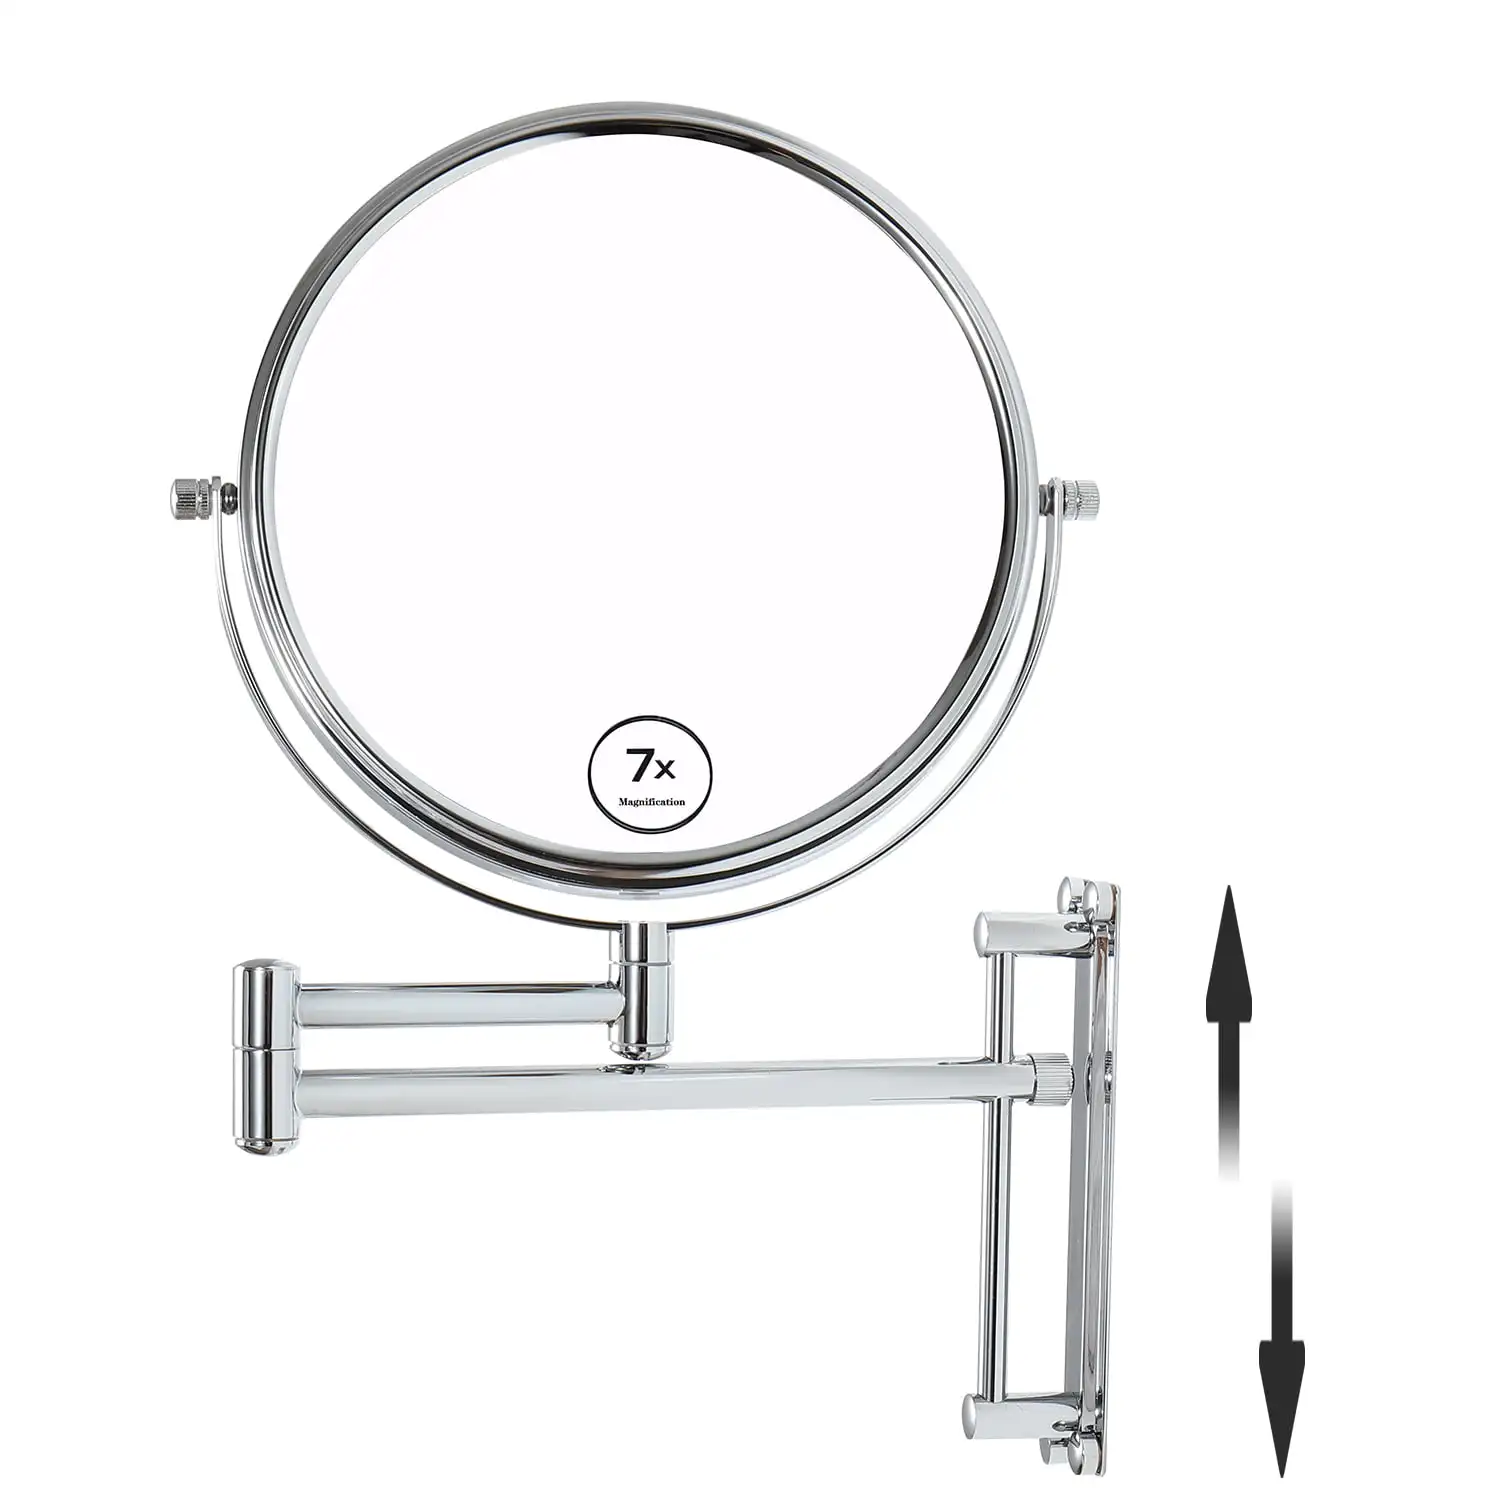 

7X Magnification Wall Mount Makeup Mirror Adjustable Height Double-Sided Mirrors for Bathroom Vanity, Round Shape Finish Chrome